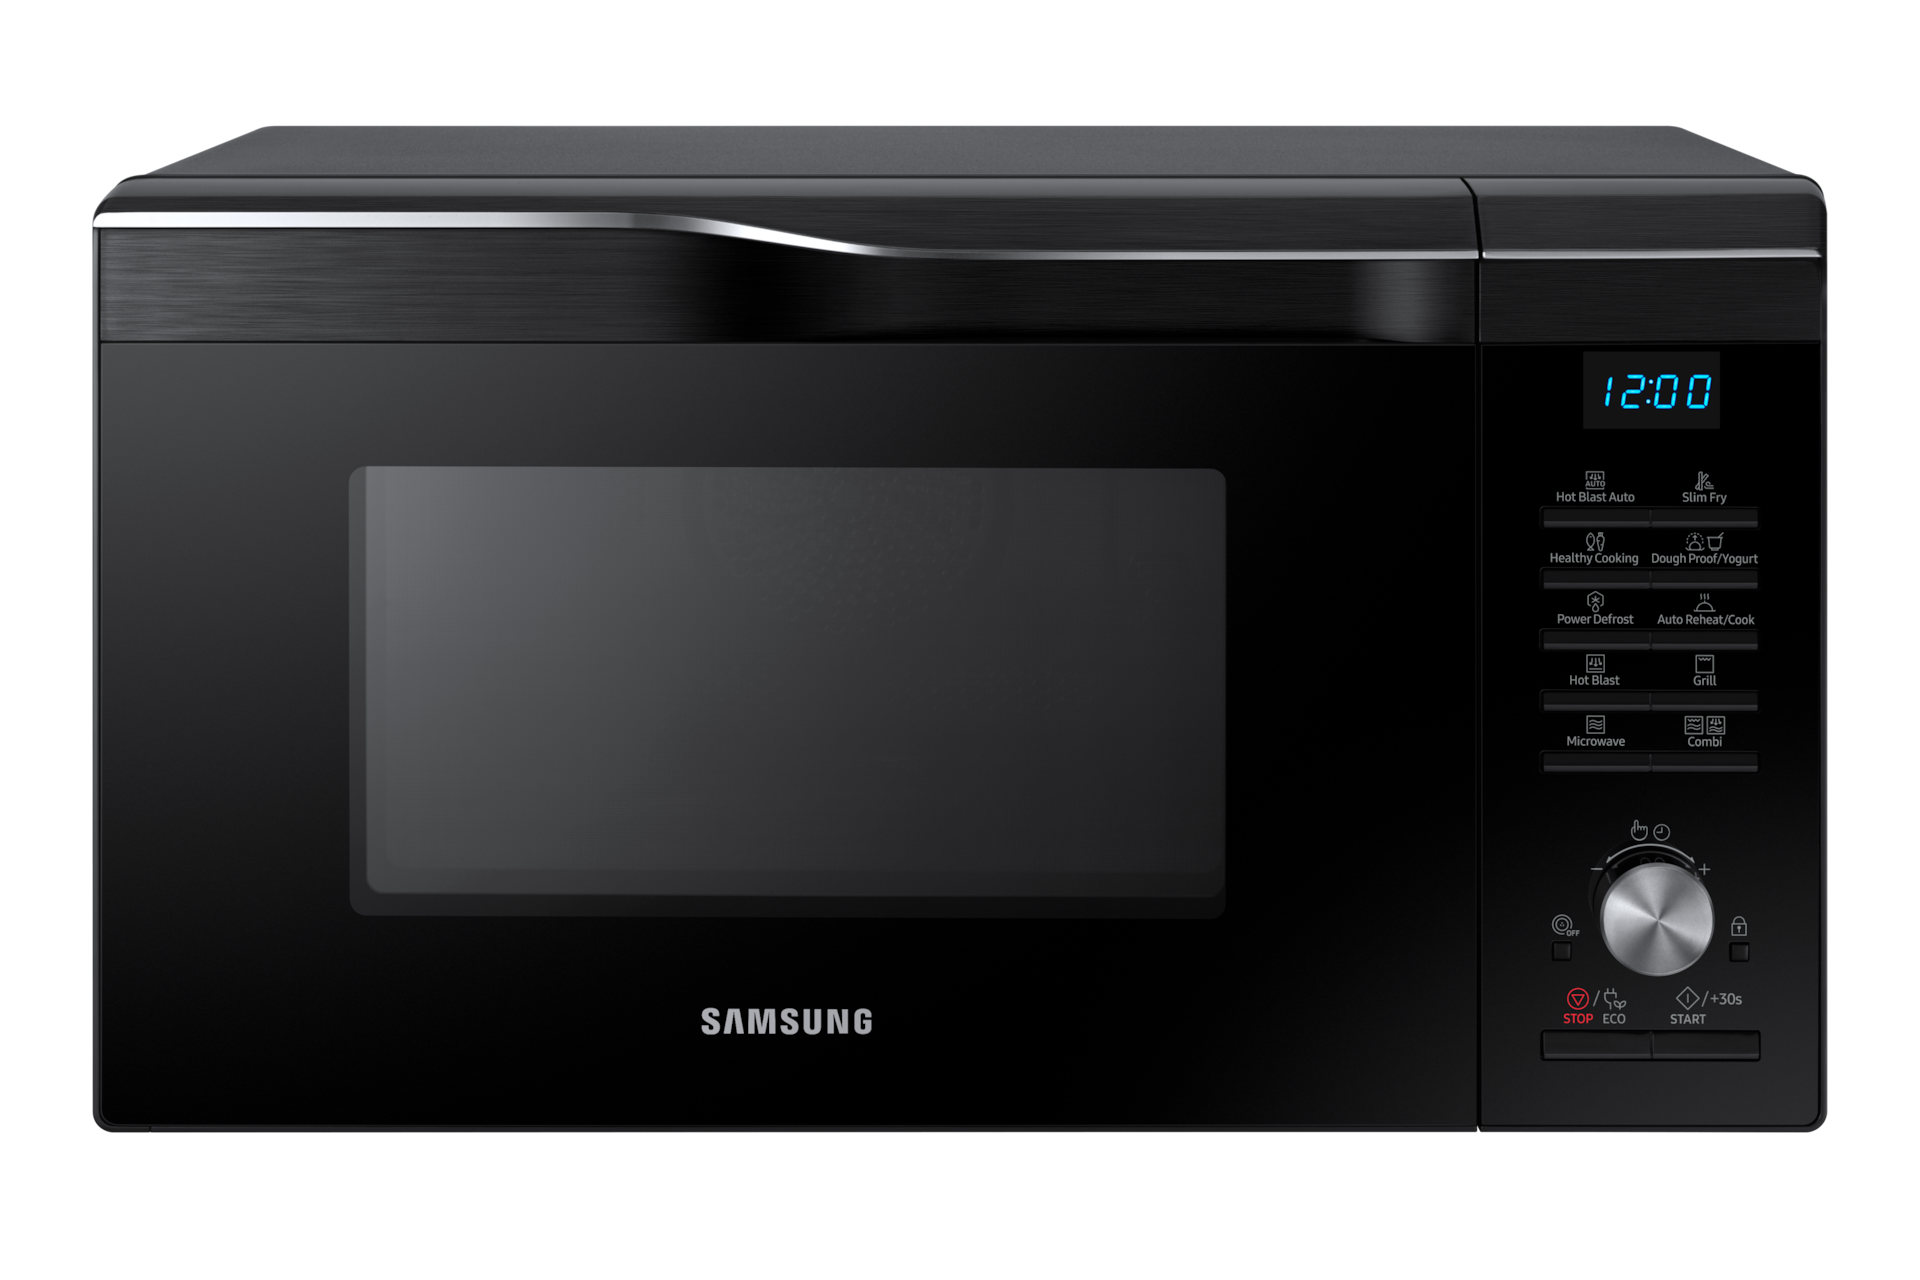 Front view of a black Samsung Combination Microwave oven (28L model) with HotBlast Technology